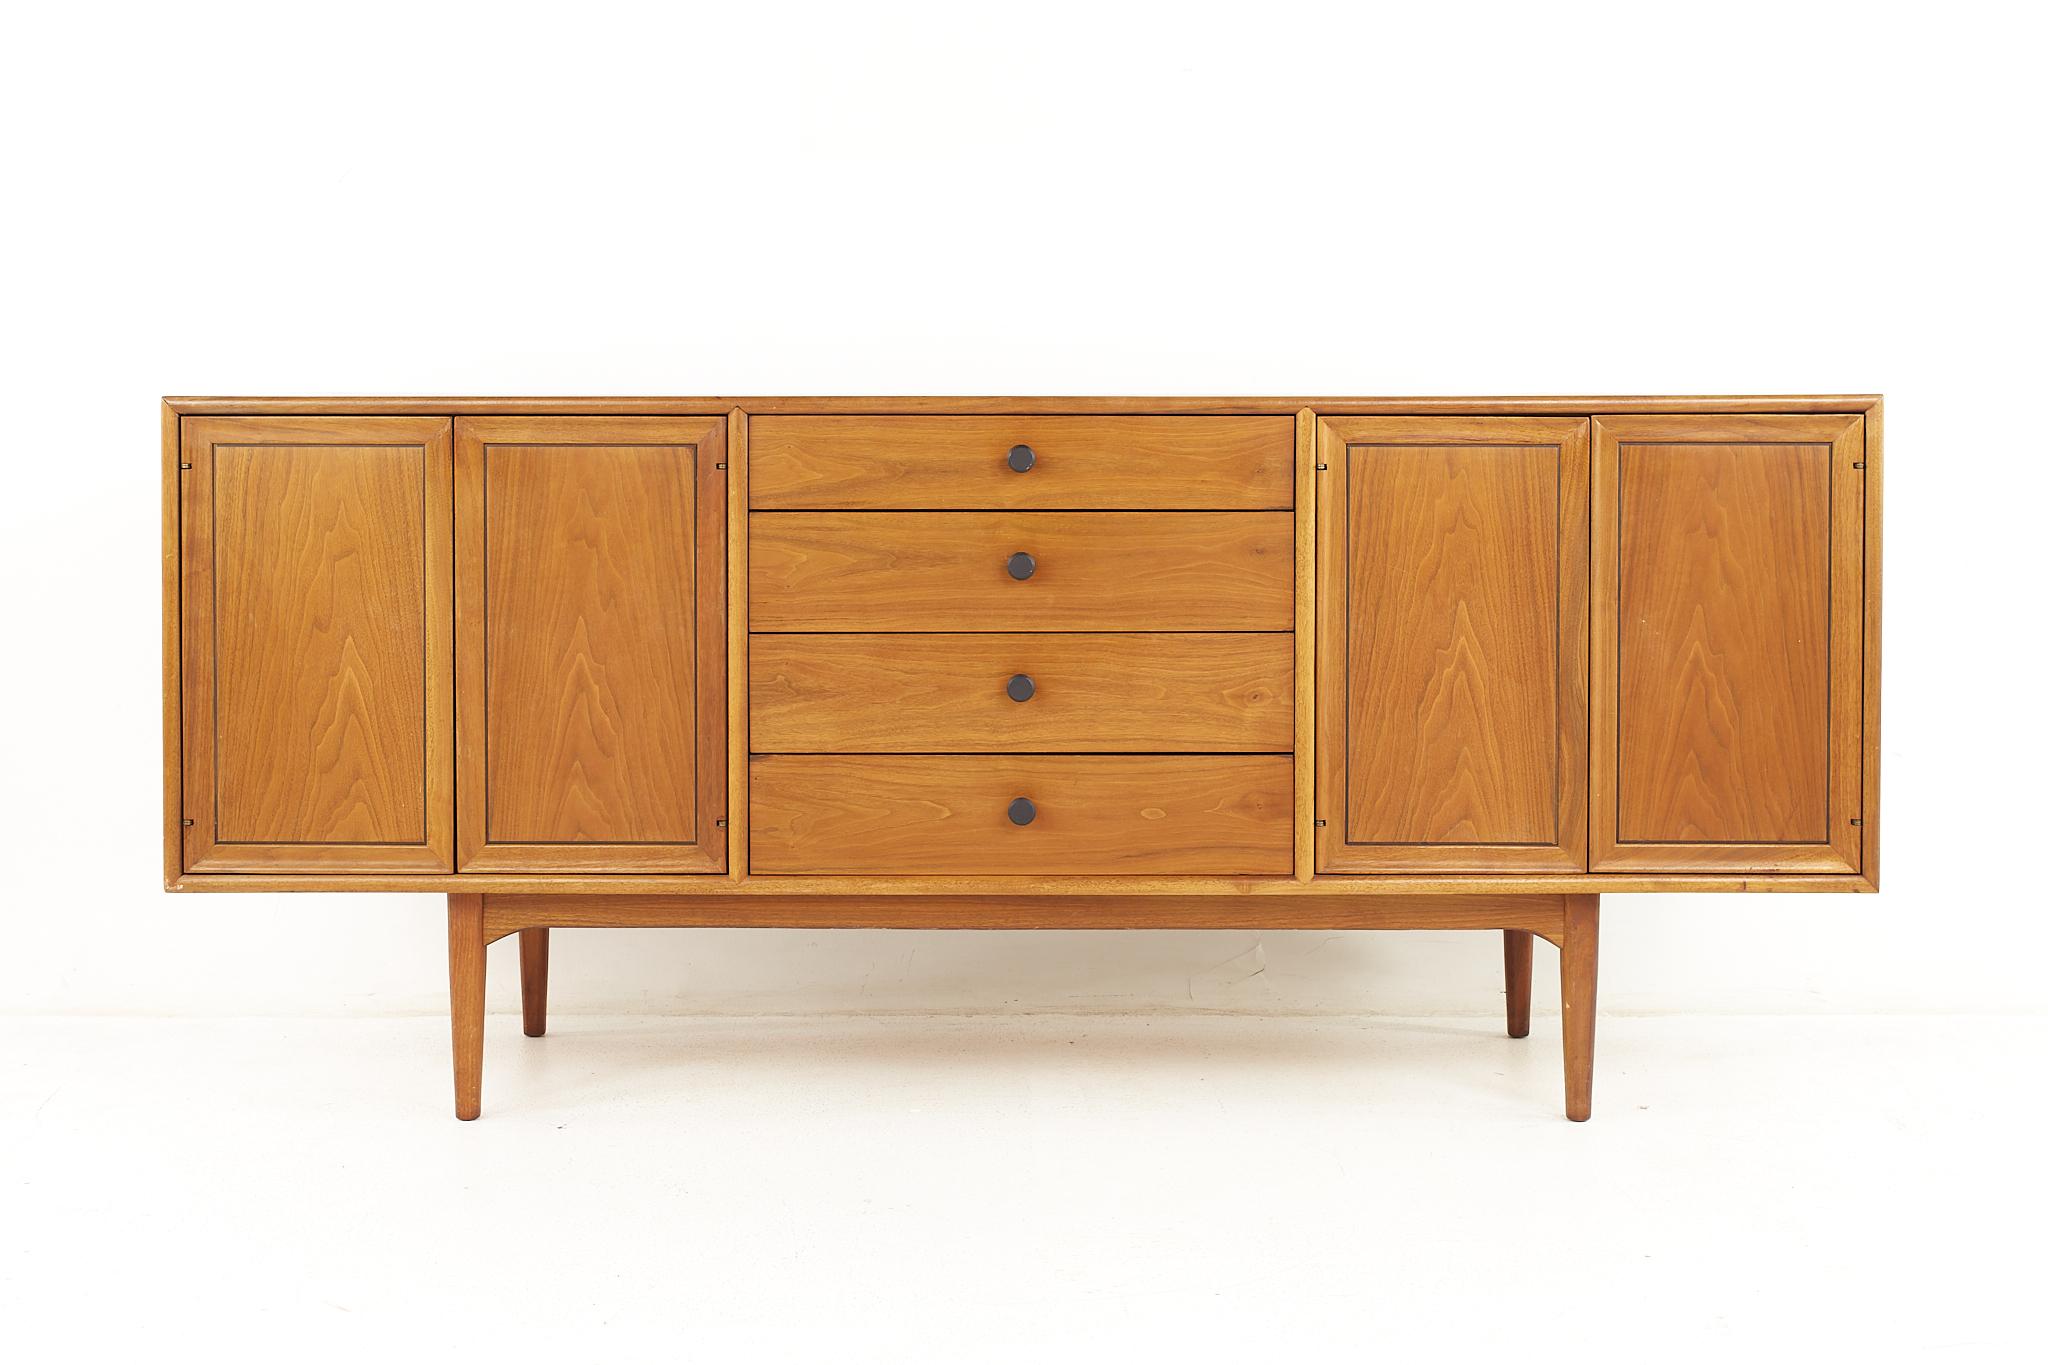 Kipp Stewart for Drexel Declaration mid century walnut credenza.

The credenza measures: 72.25 wide x 20 deep x 31 inches high. 

All pieces of furniture can be had in what we call restored vintage condition. That means the piece is restored